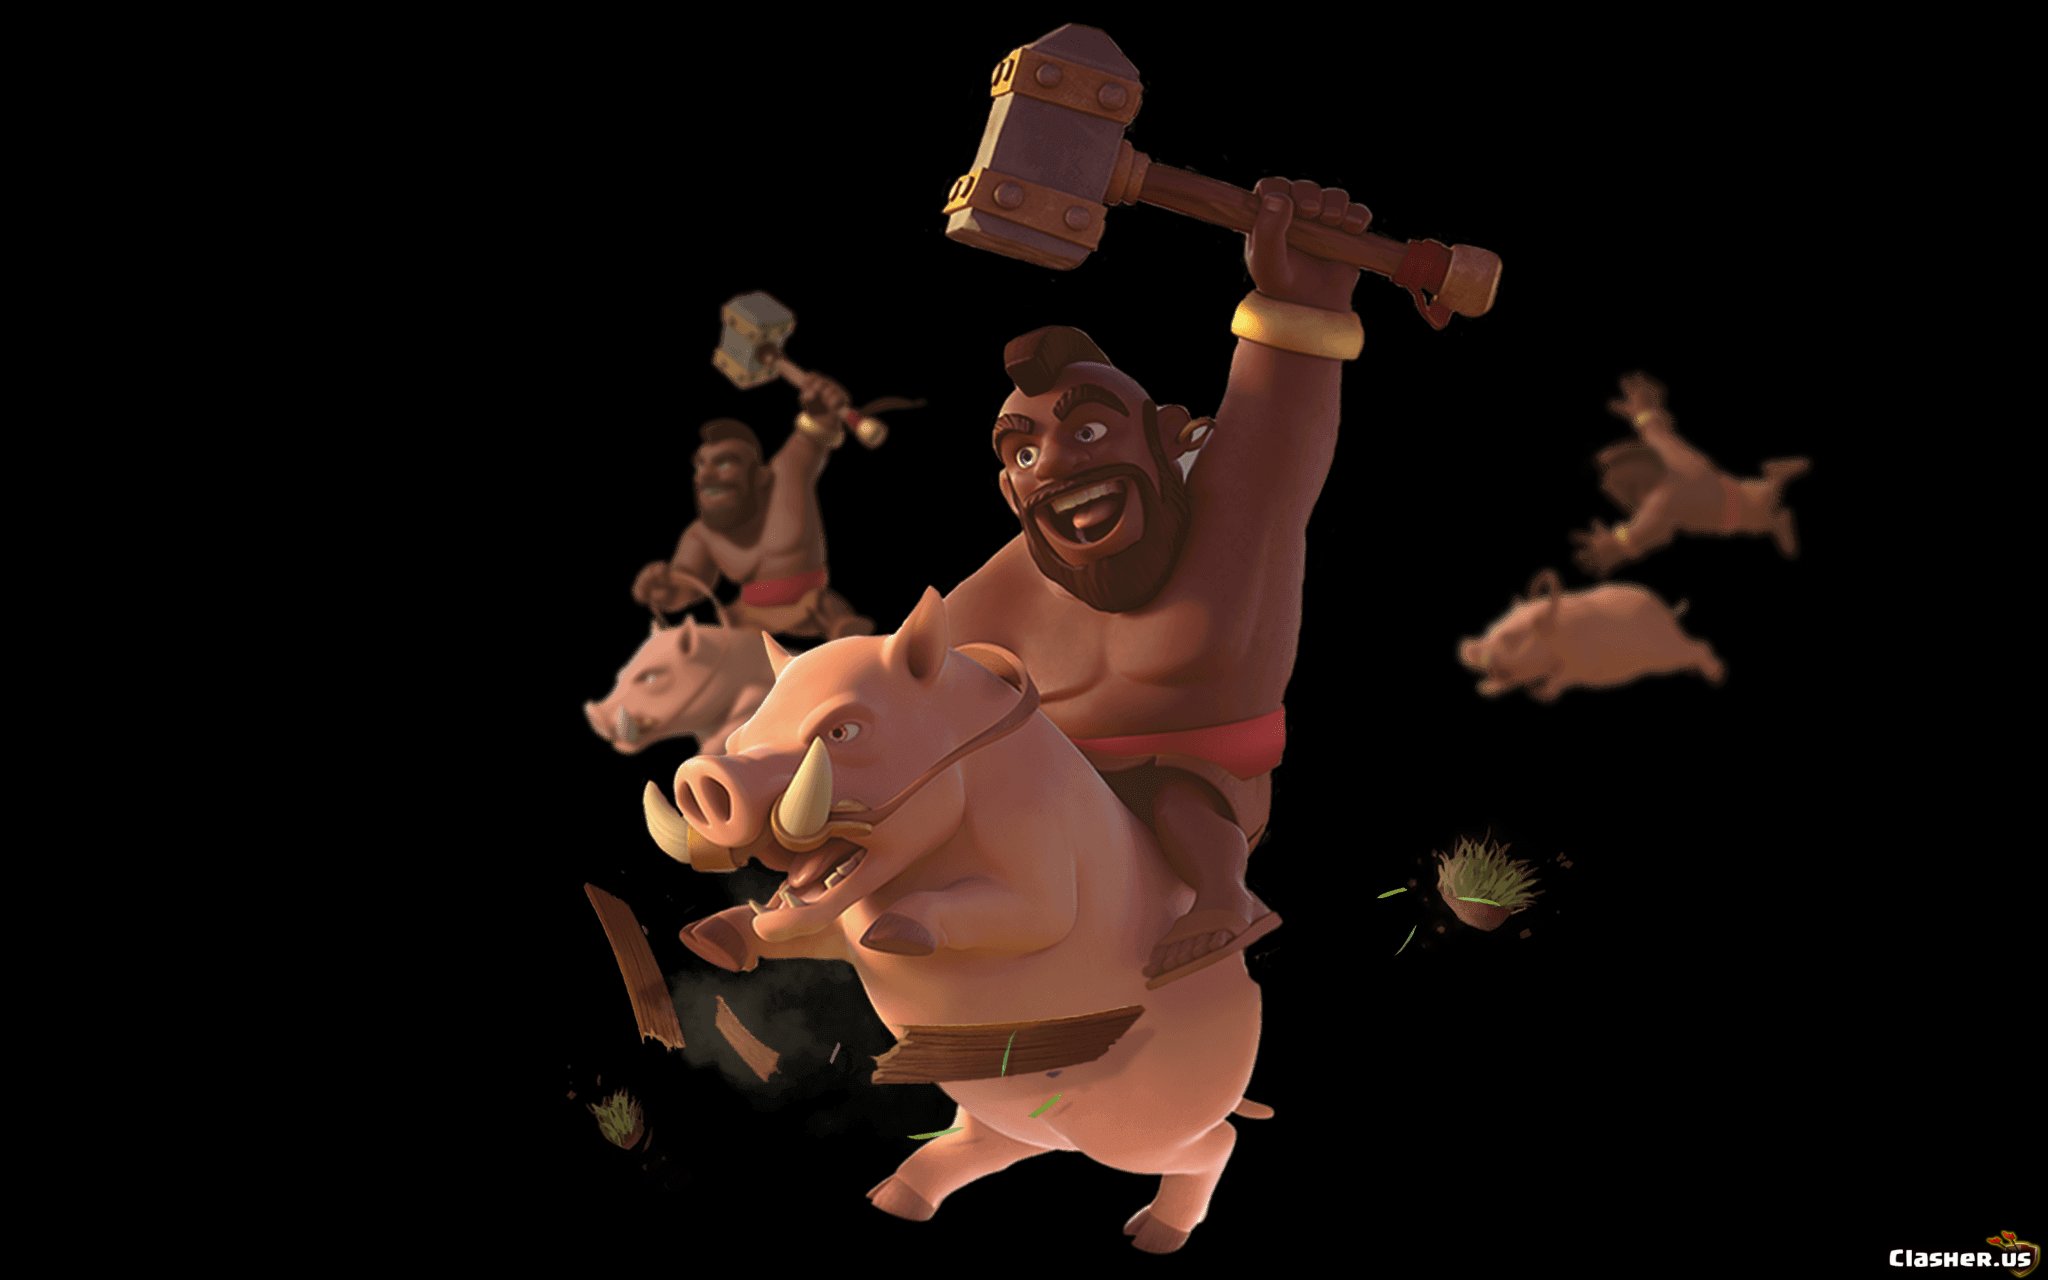 Hog Rider go - Clash of Clans Wallpapers | Clasher.us - Download Hog Rider ...